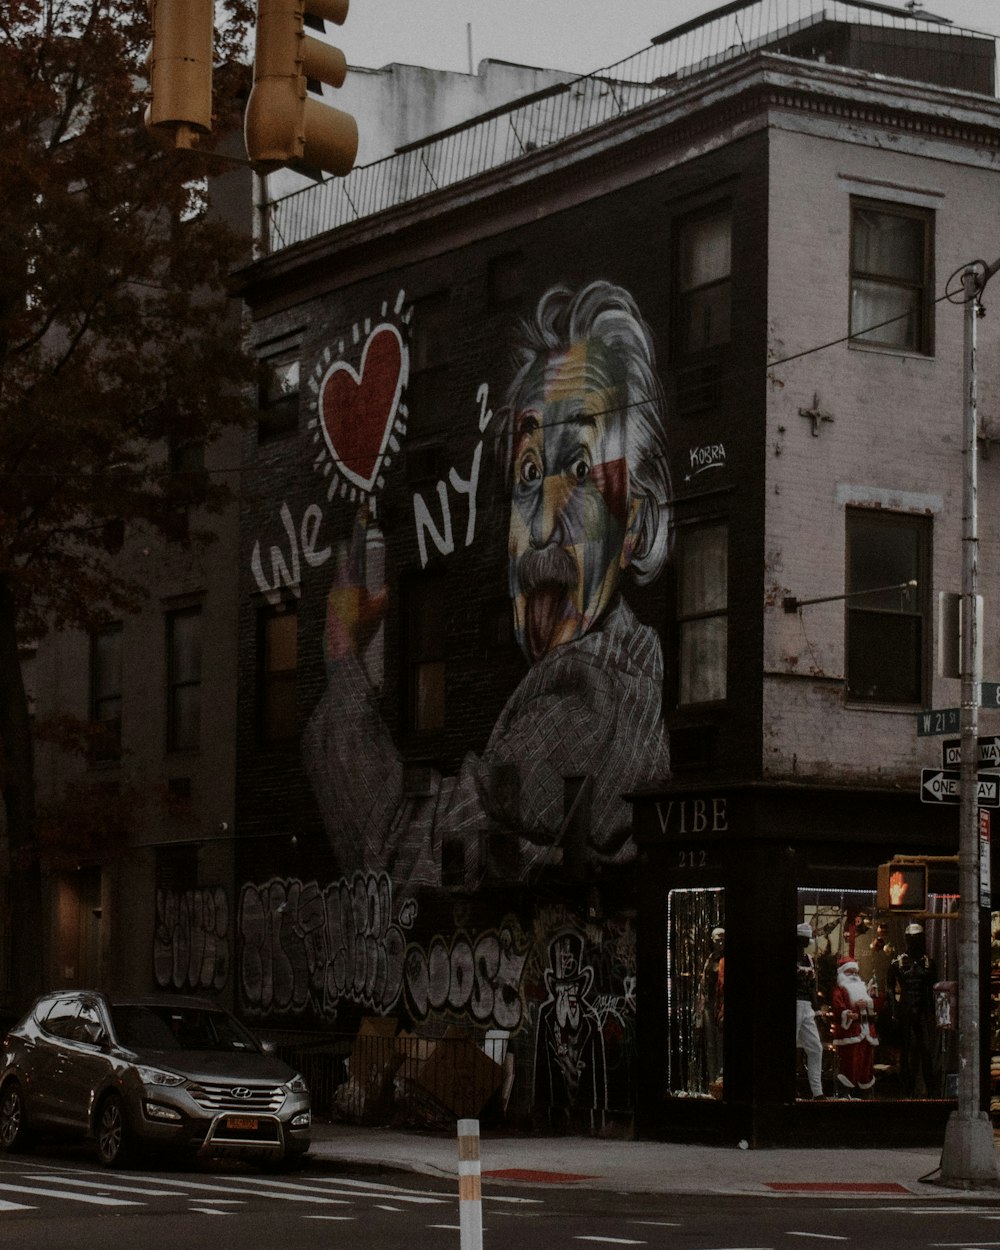 a street corner with a large mural of a man holding a heart